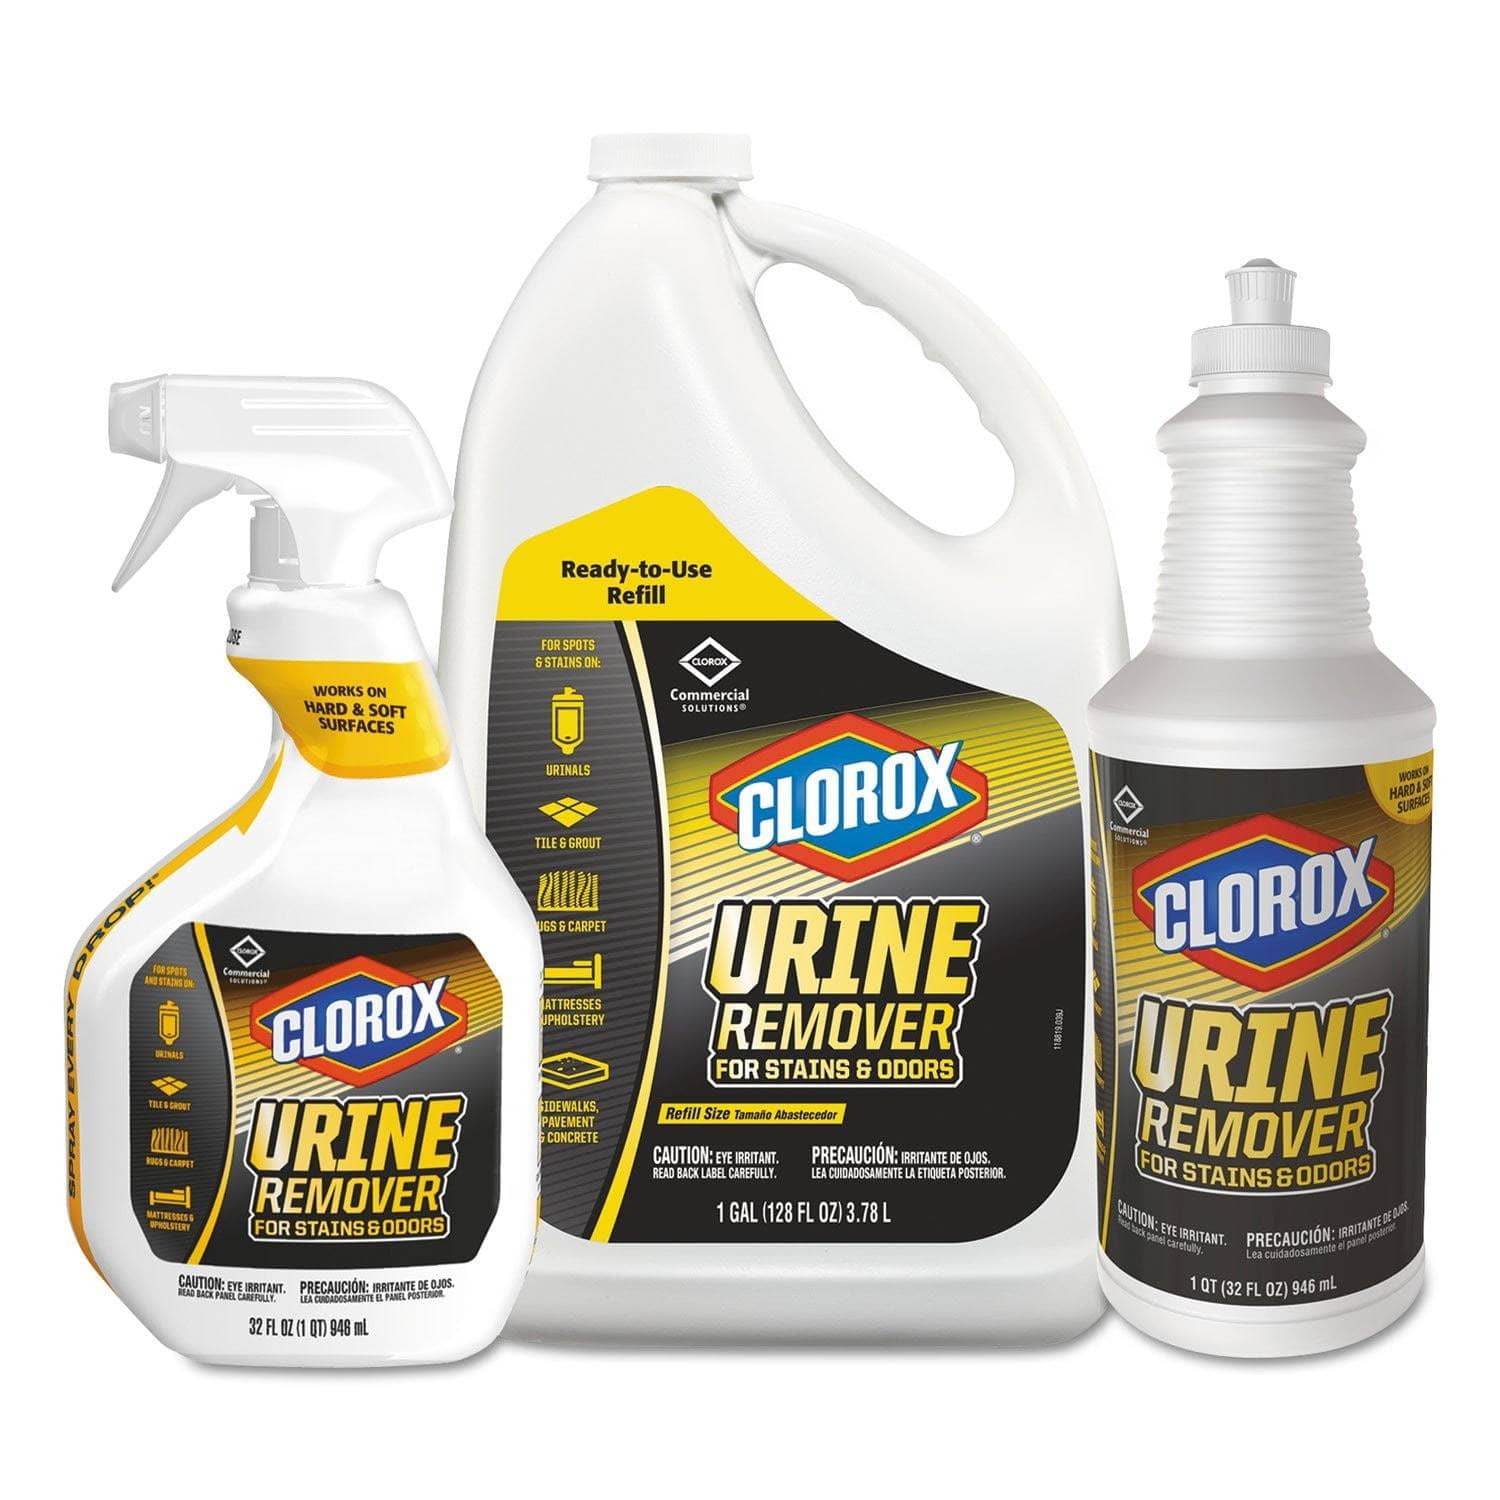 Clorox Urine Remover For Stains And Odors 32 Oz Pull Top Bottle 6 Carton Clo31415